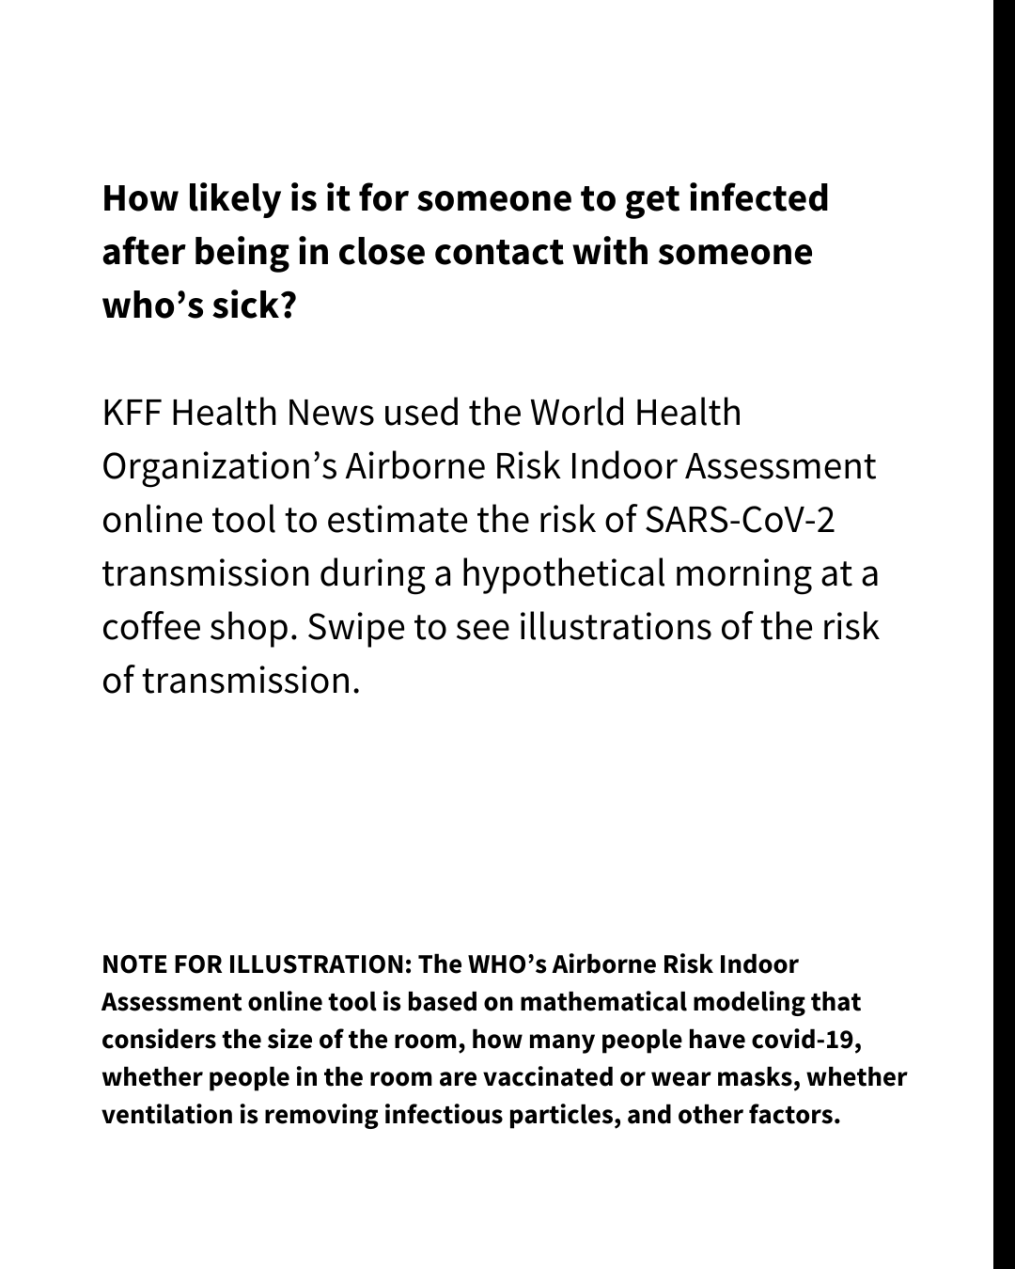 A slide with black text on a white background reads: How likely is it for someone to get infected after being in close contact with someone who’s sick? KFF Health News used the World Health Organization’s Airborne Risk Indoor Assessment online tool to estimate the risk of SARS-CoV-2 transmission during a hypothetical morning at a coffee shop. Swipe to see illustrations of the risk of transmission. NOTE FOR ILLUSTRATION: The WHO’s Airborne Risk Indoor Assessment online tool is based on mathematical modeling that considers the size of the room, how many people have covid-19, whether people in the room are vaccinated or wear masks, whether ventilation is removing infectious particles, and other factors. 